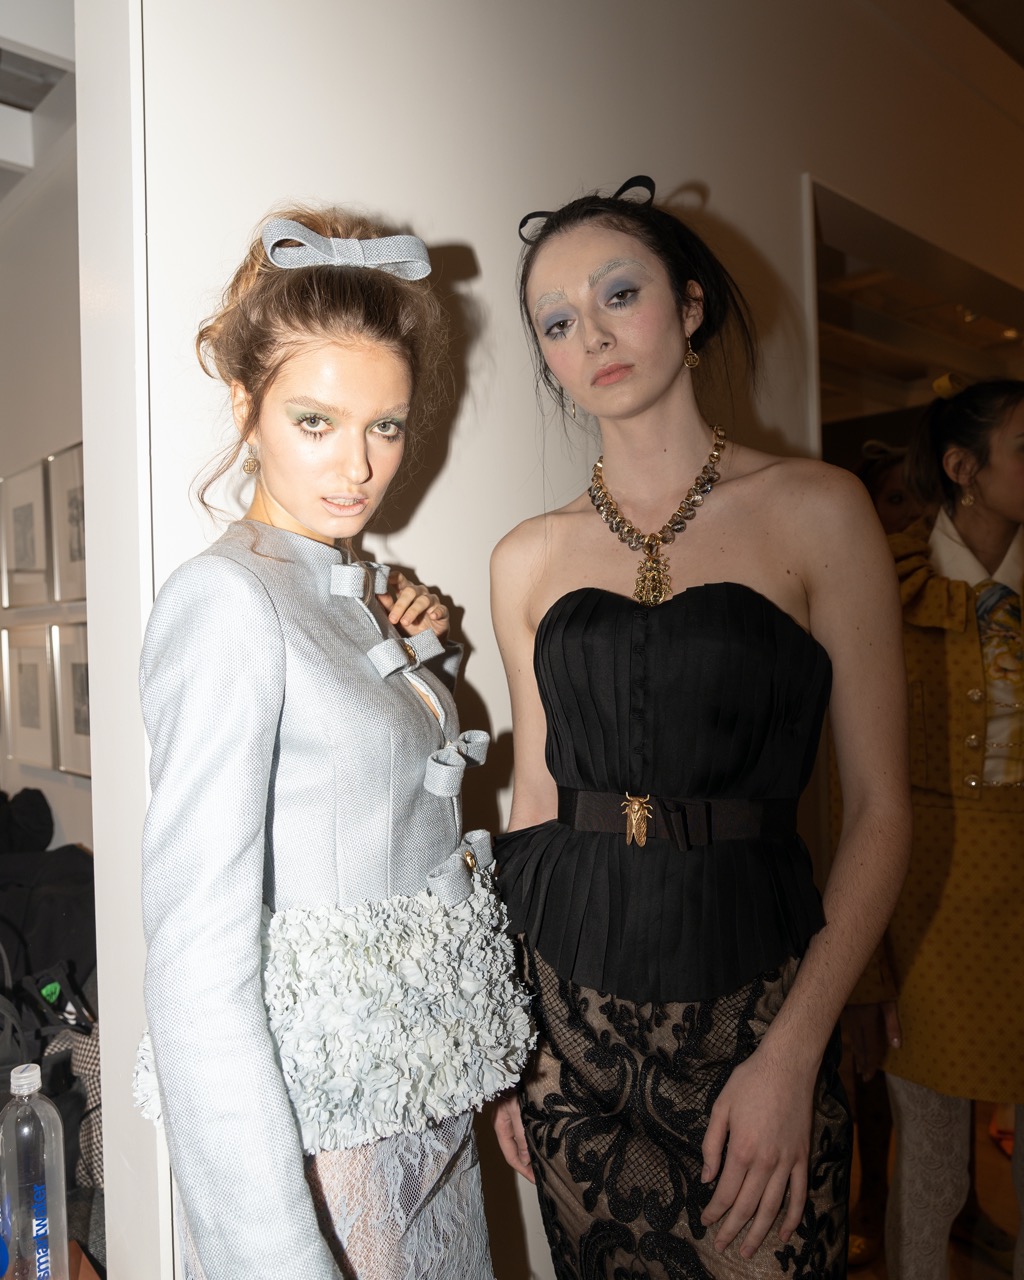 A photograph of two models looking into the camera, wearing blue eyeshadow. The model on the left wears a dusty blue set lined with bows that match the one on her head. The model on the right wears a black top with a gold insect belt, black mesh pants and a chunky necklace that matches the belt.